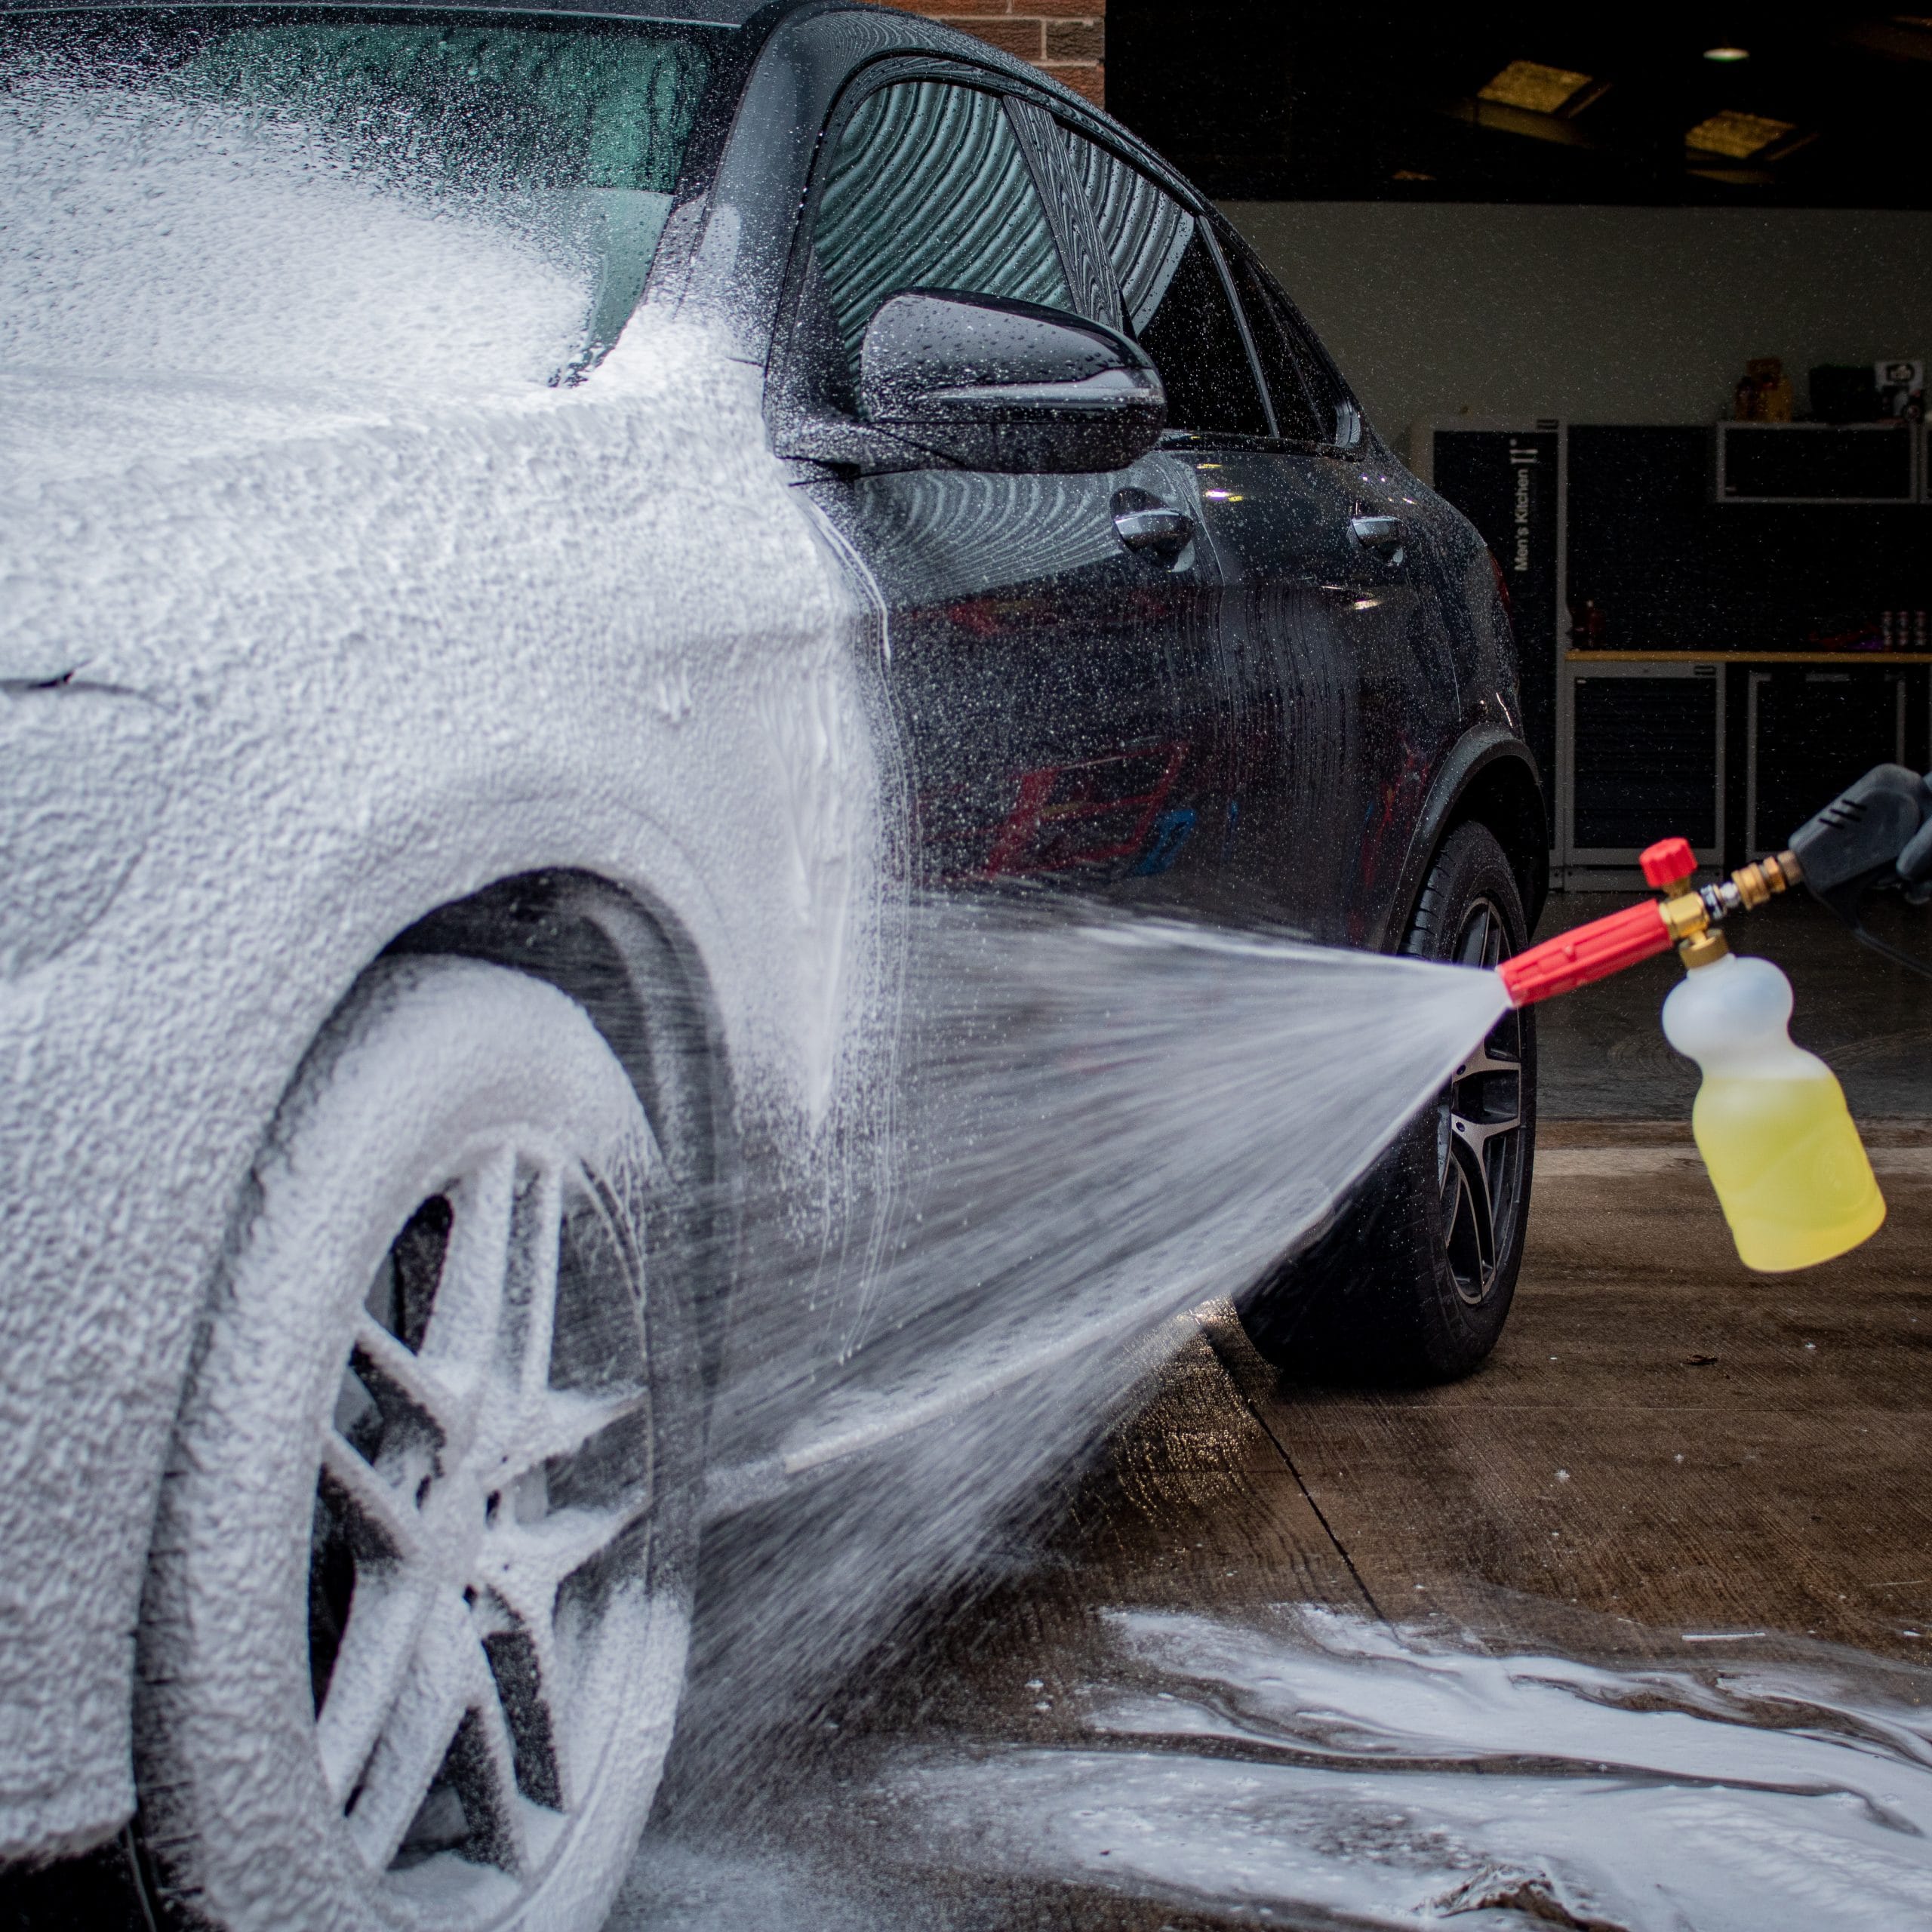 What is snow-washing? — End Snow-Washing